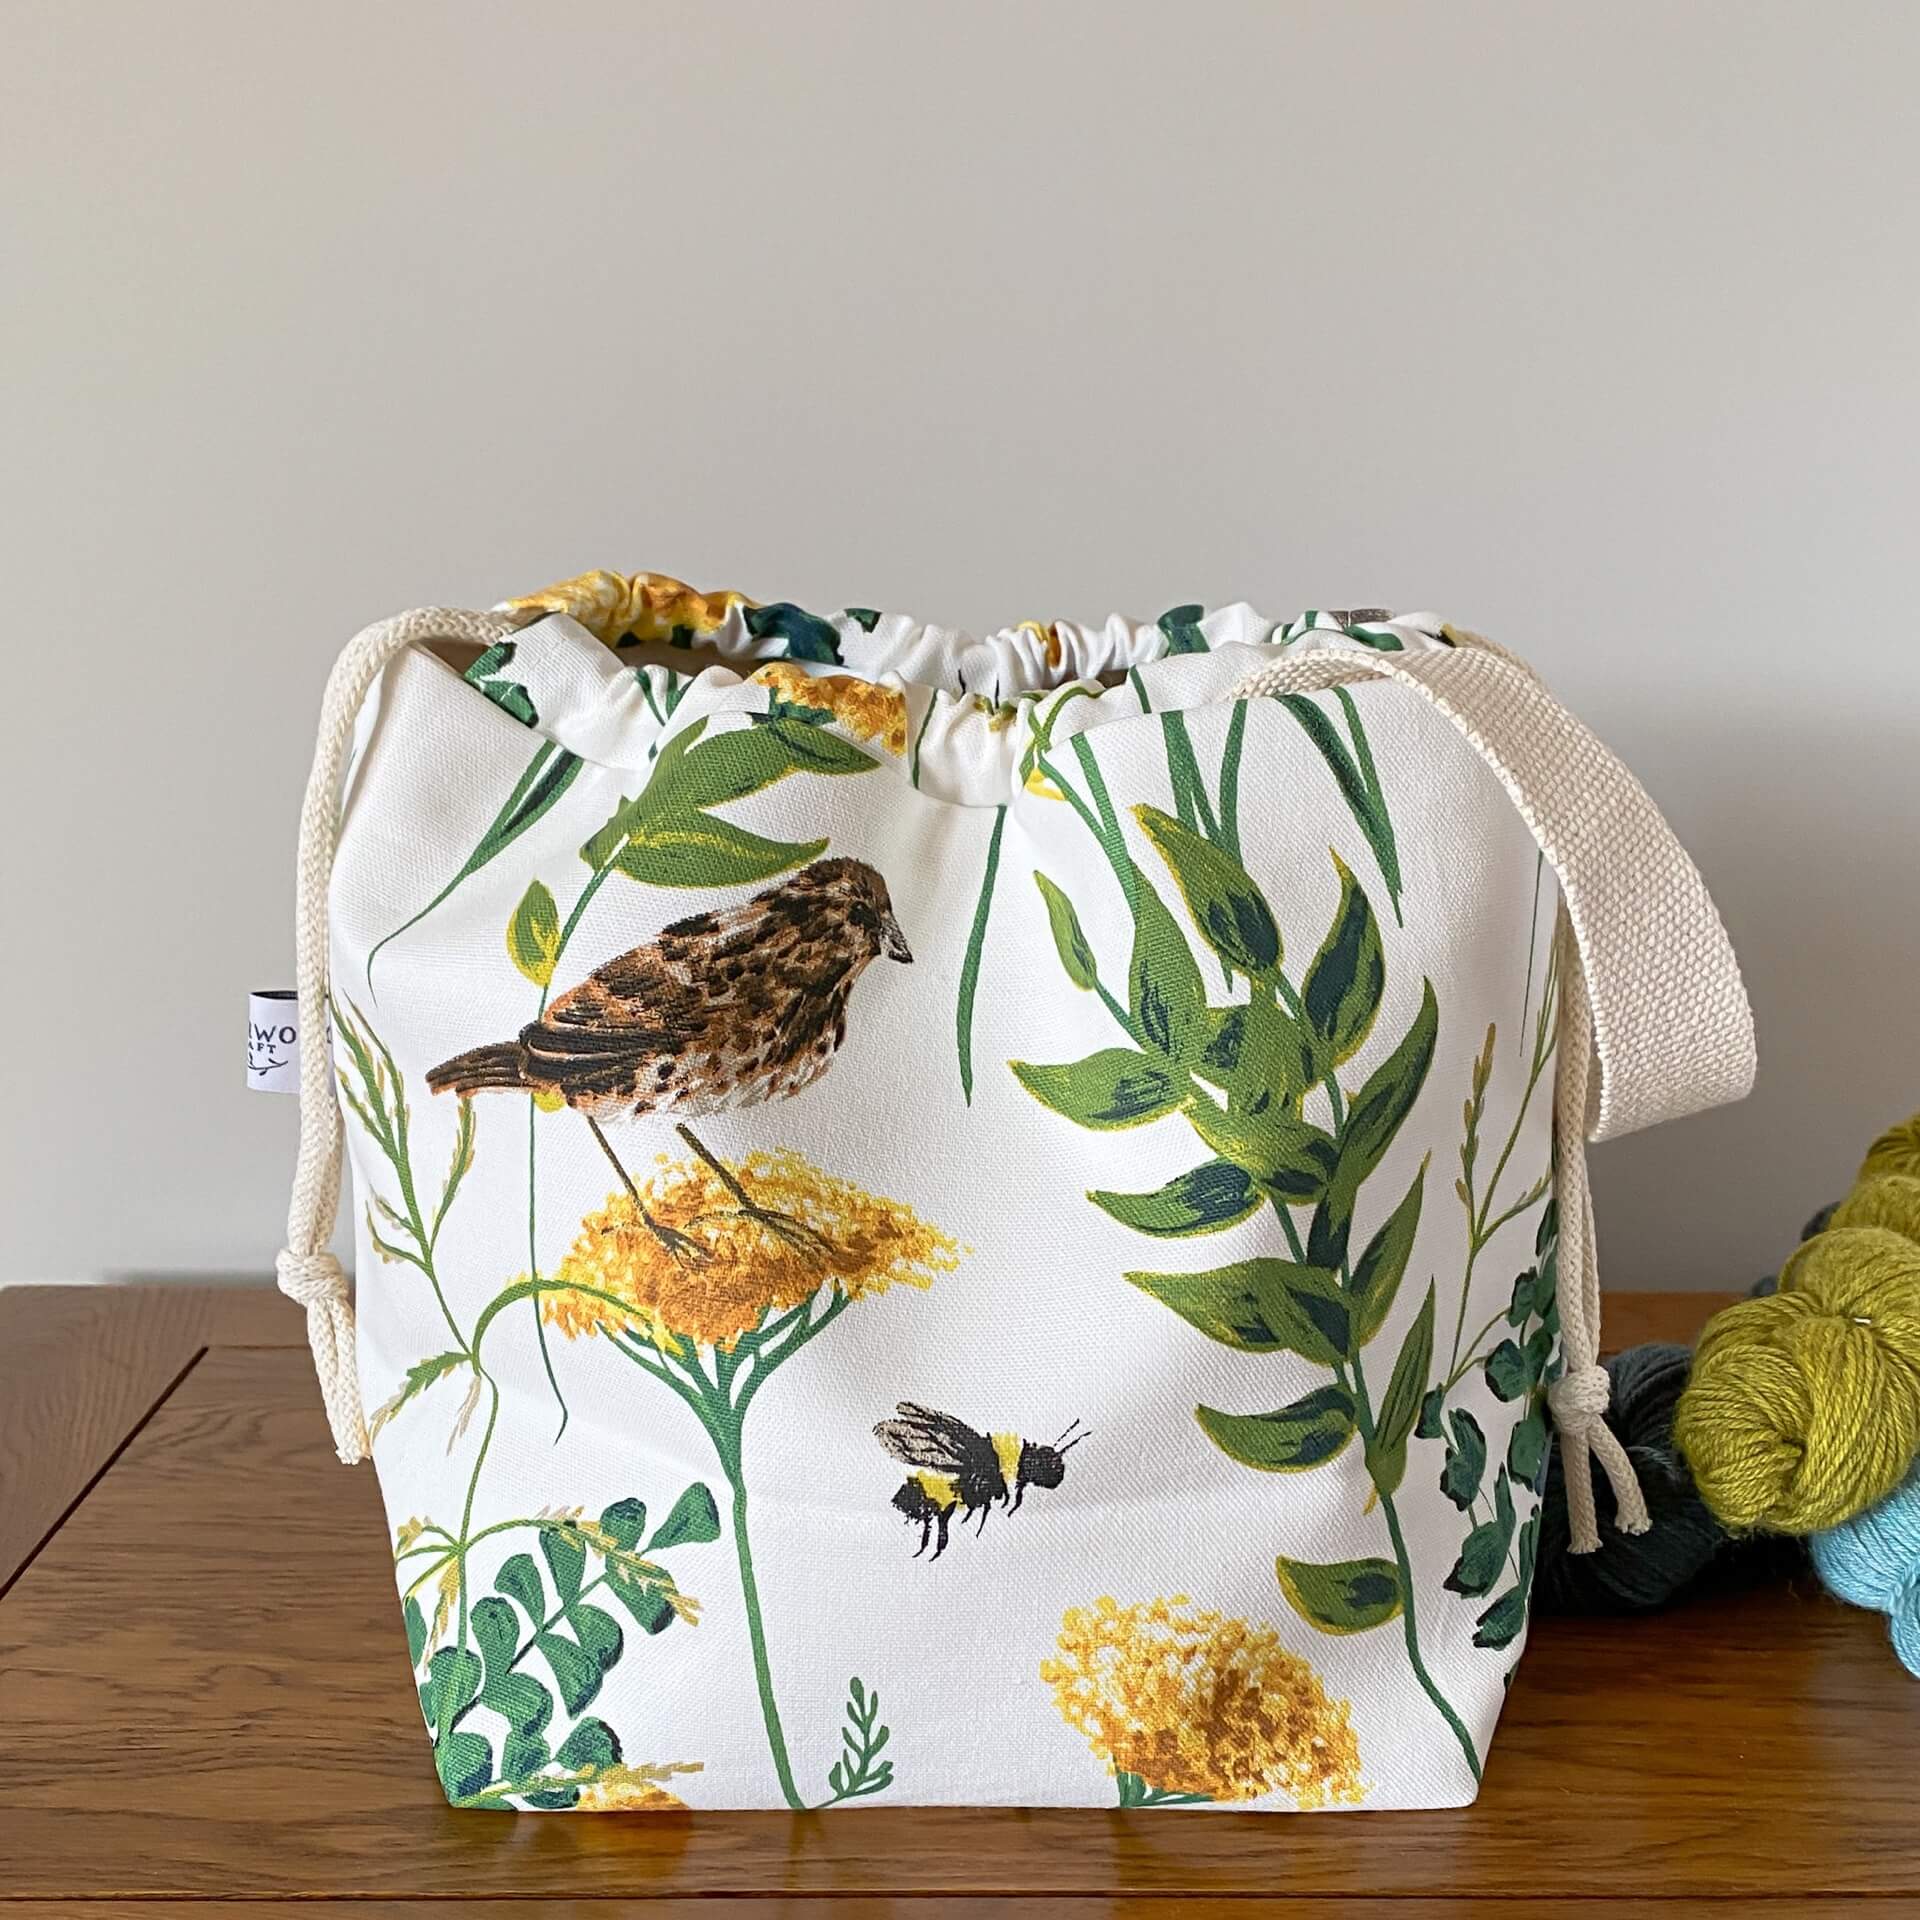 A drawstring bag used for organising knitting and crochet projects sits on a wooden table. Next to it are three skeins of yarn in shades of blue and green. The bag has been made using a white fabric that has a summery print with foliage, a song thrush bird and a bumble bee printed on it. 